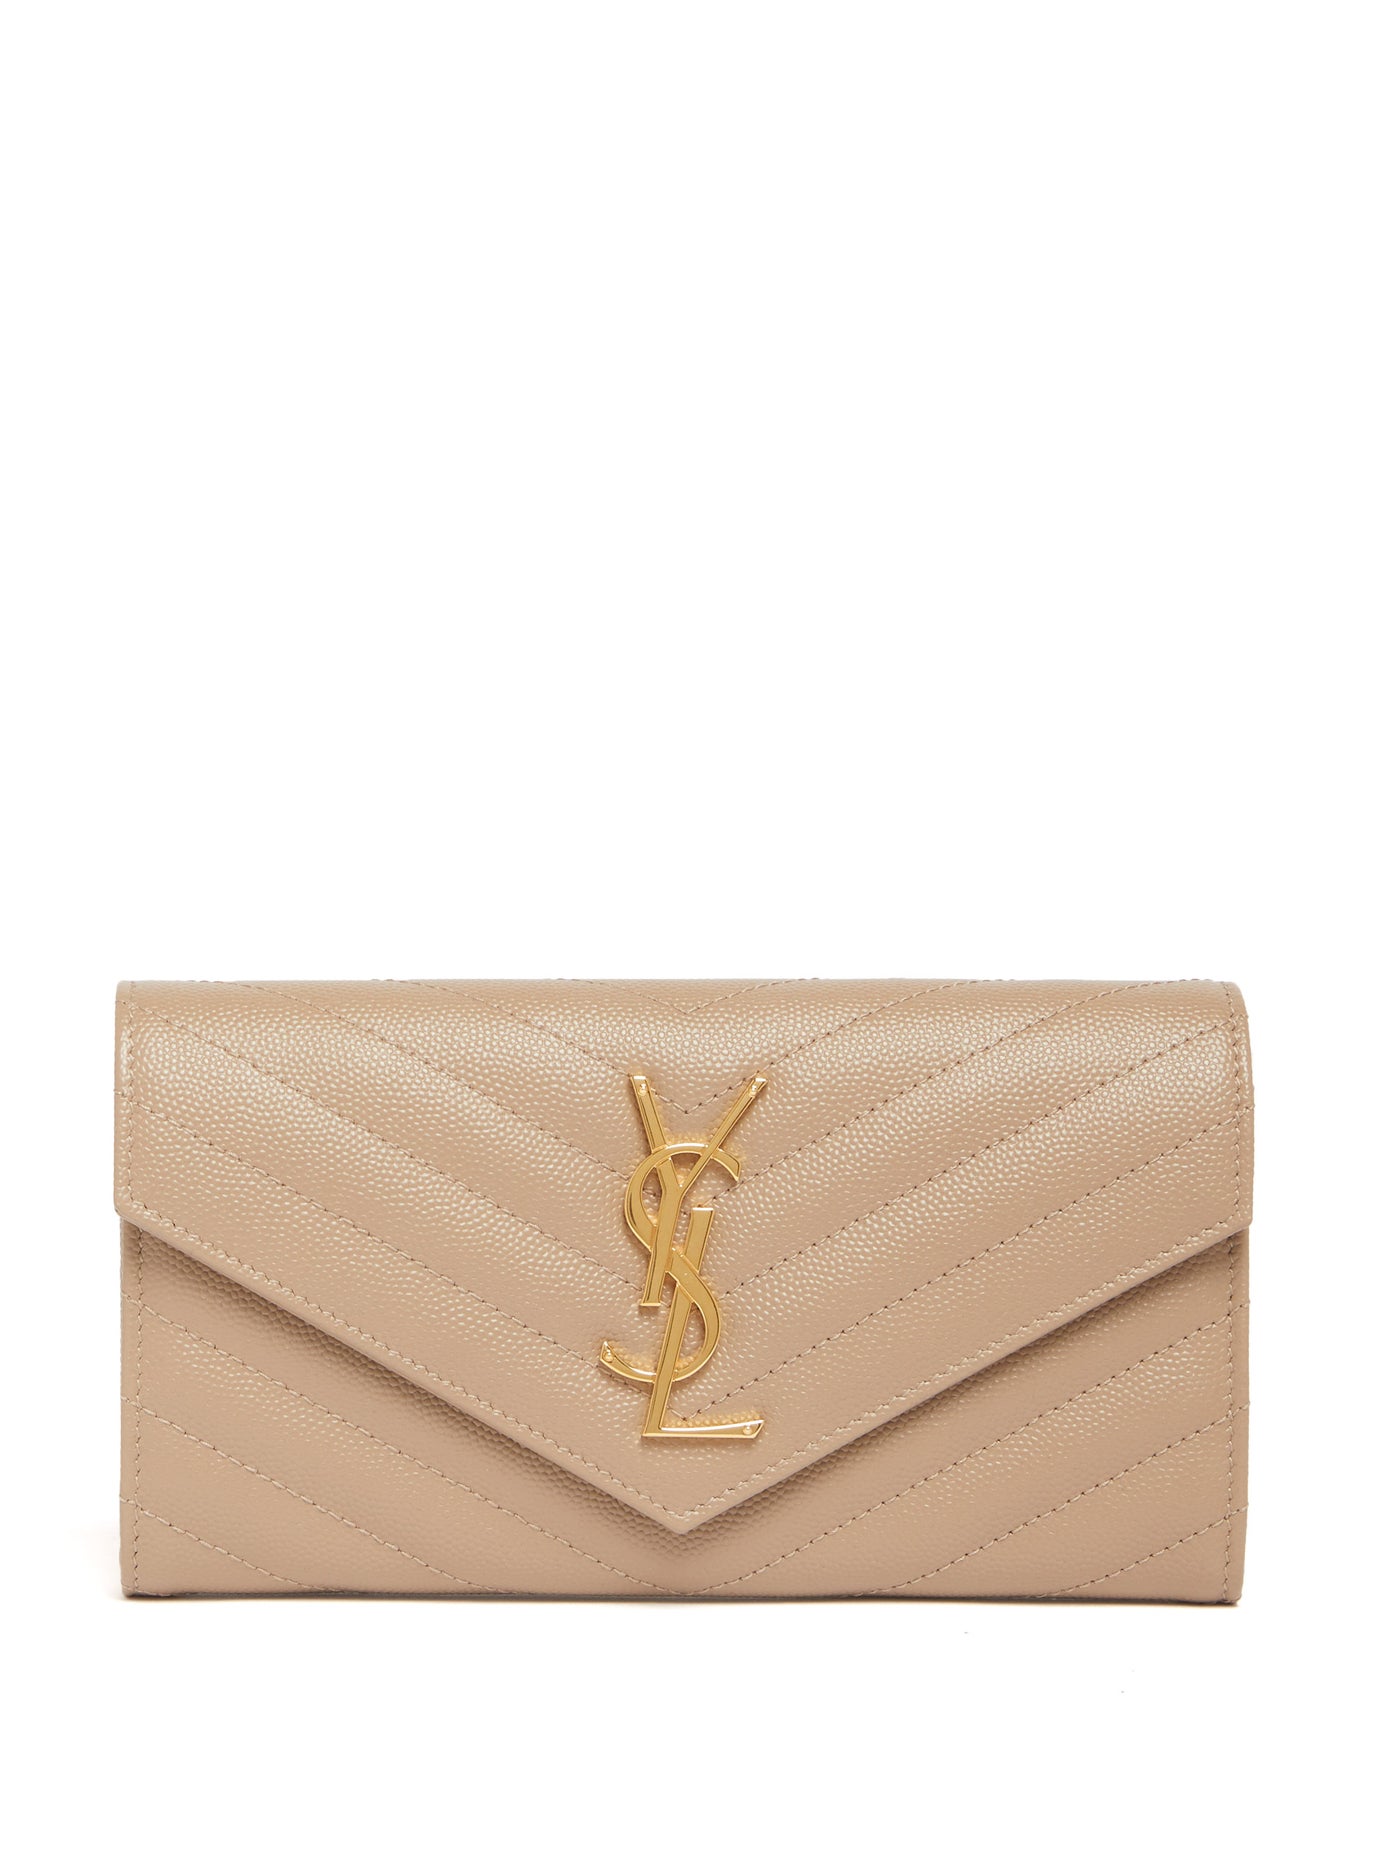 Saint Laurent - Monogram Quilted-Leather Wallet | ABOUT ICONS